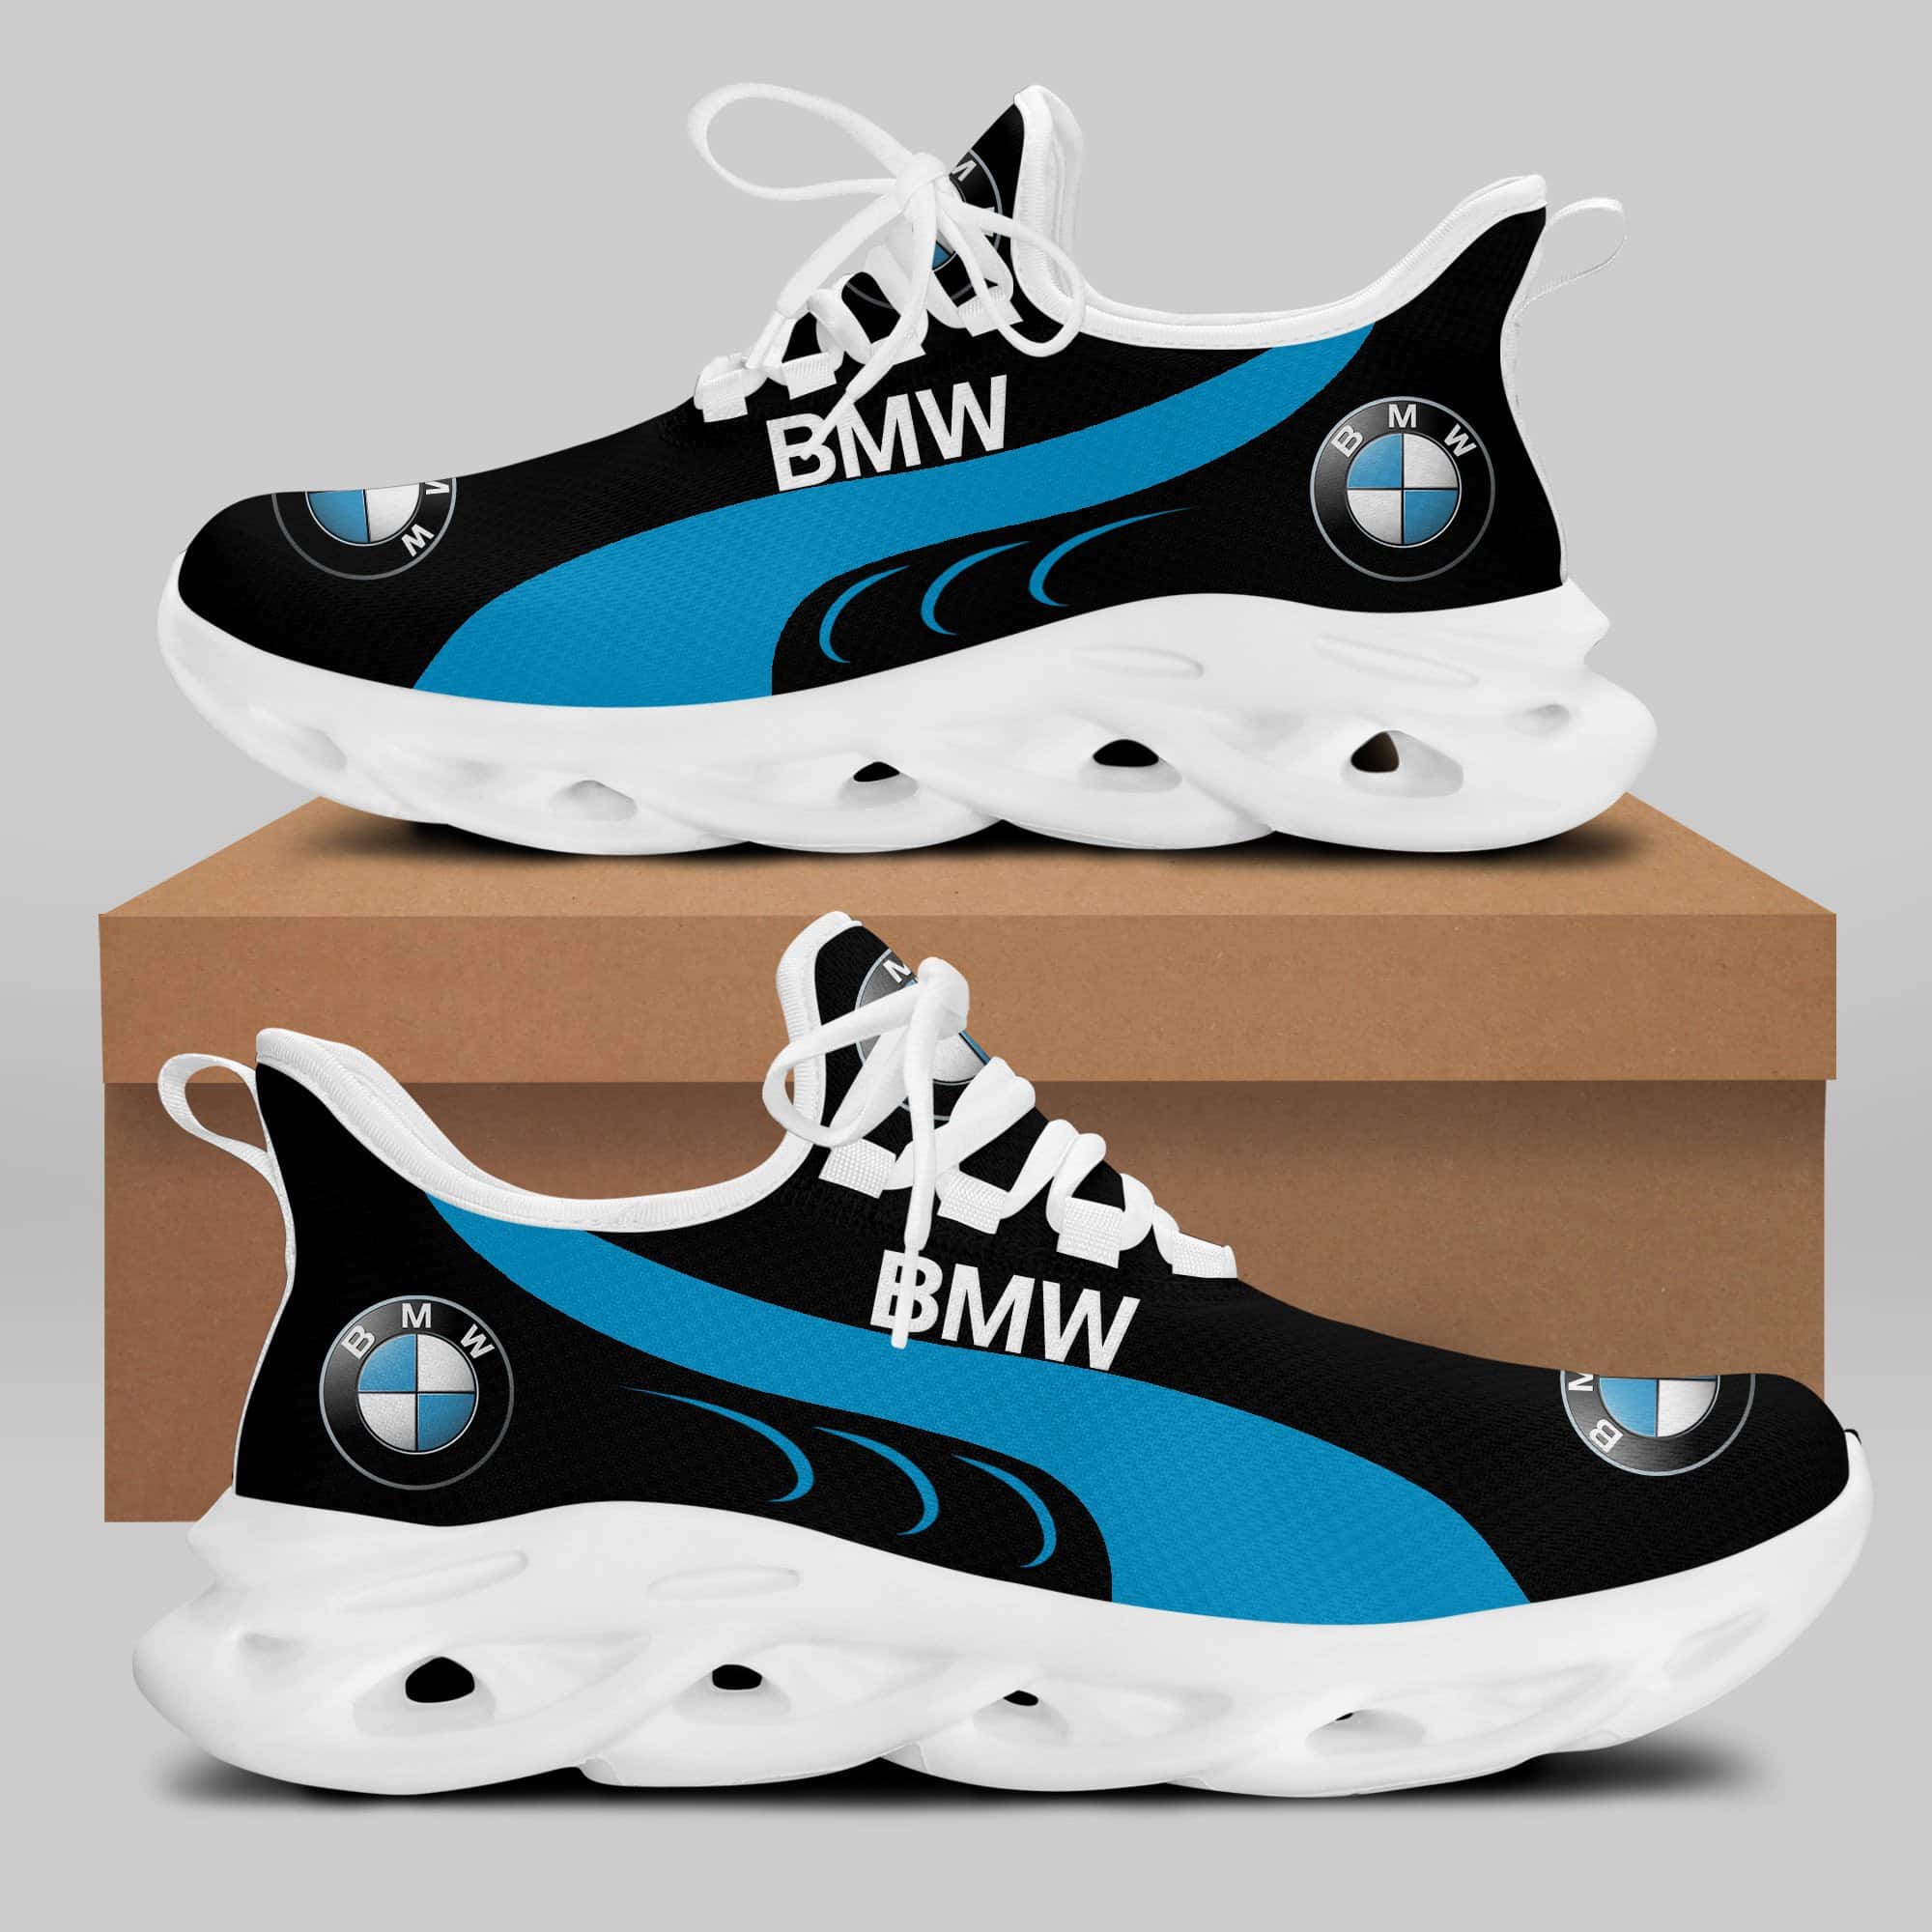 Bmw Running Shoes Max Soul Shoes Sneakers Ver 50 2